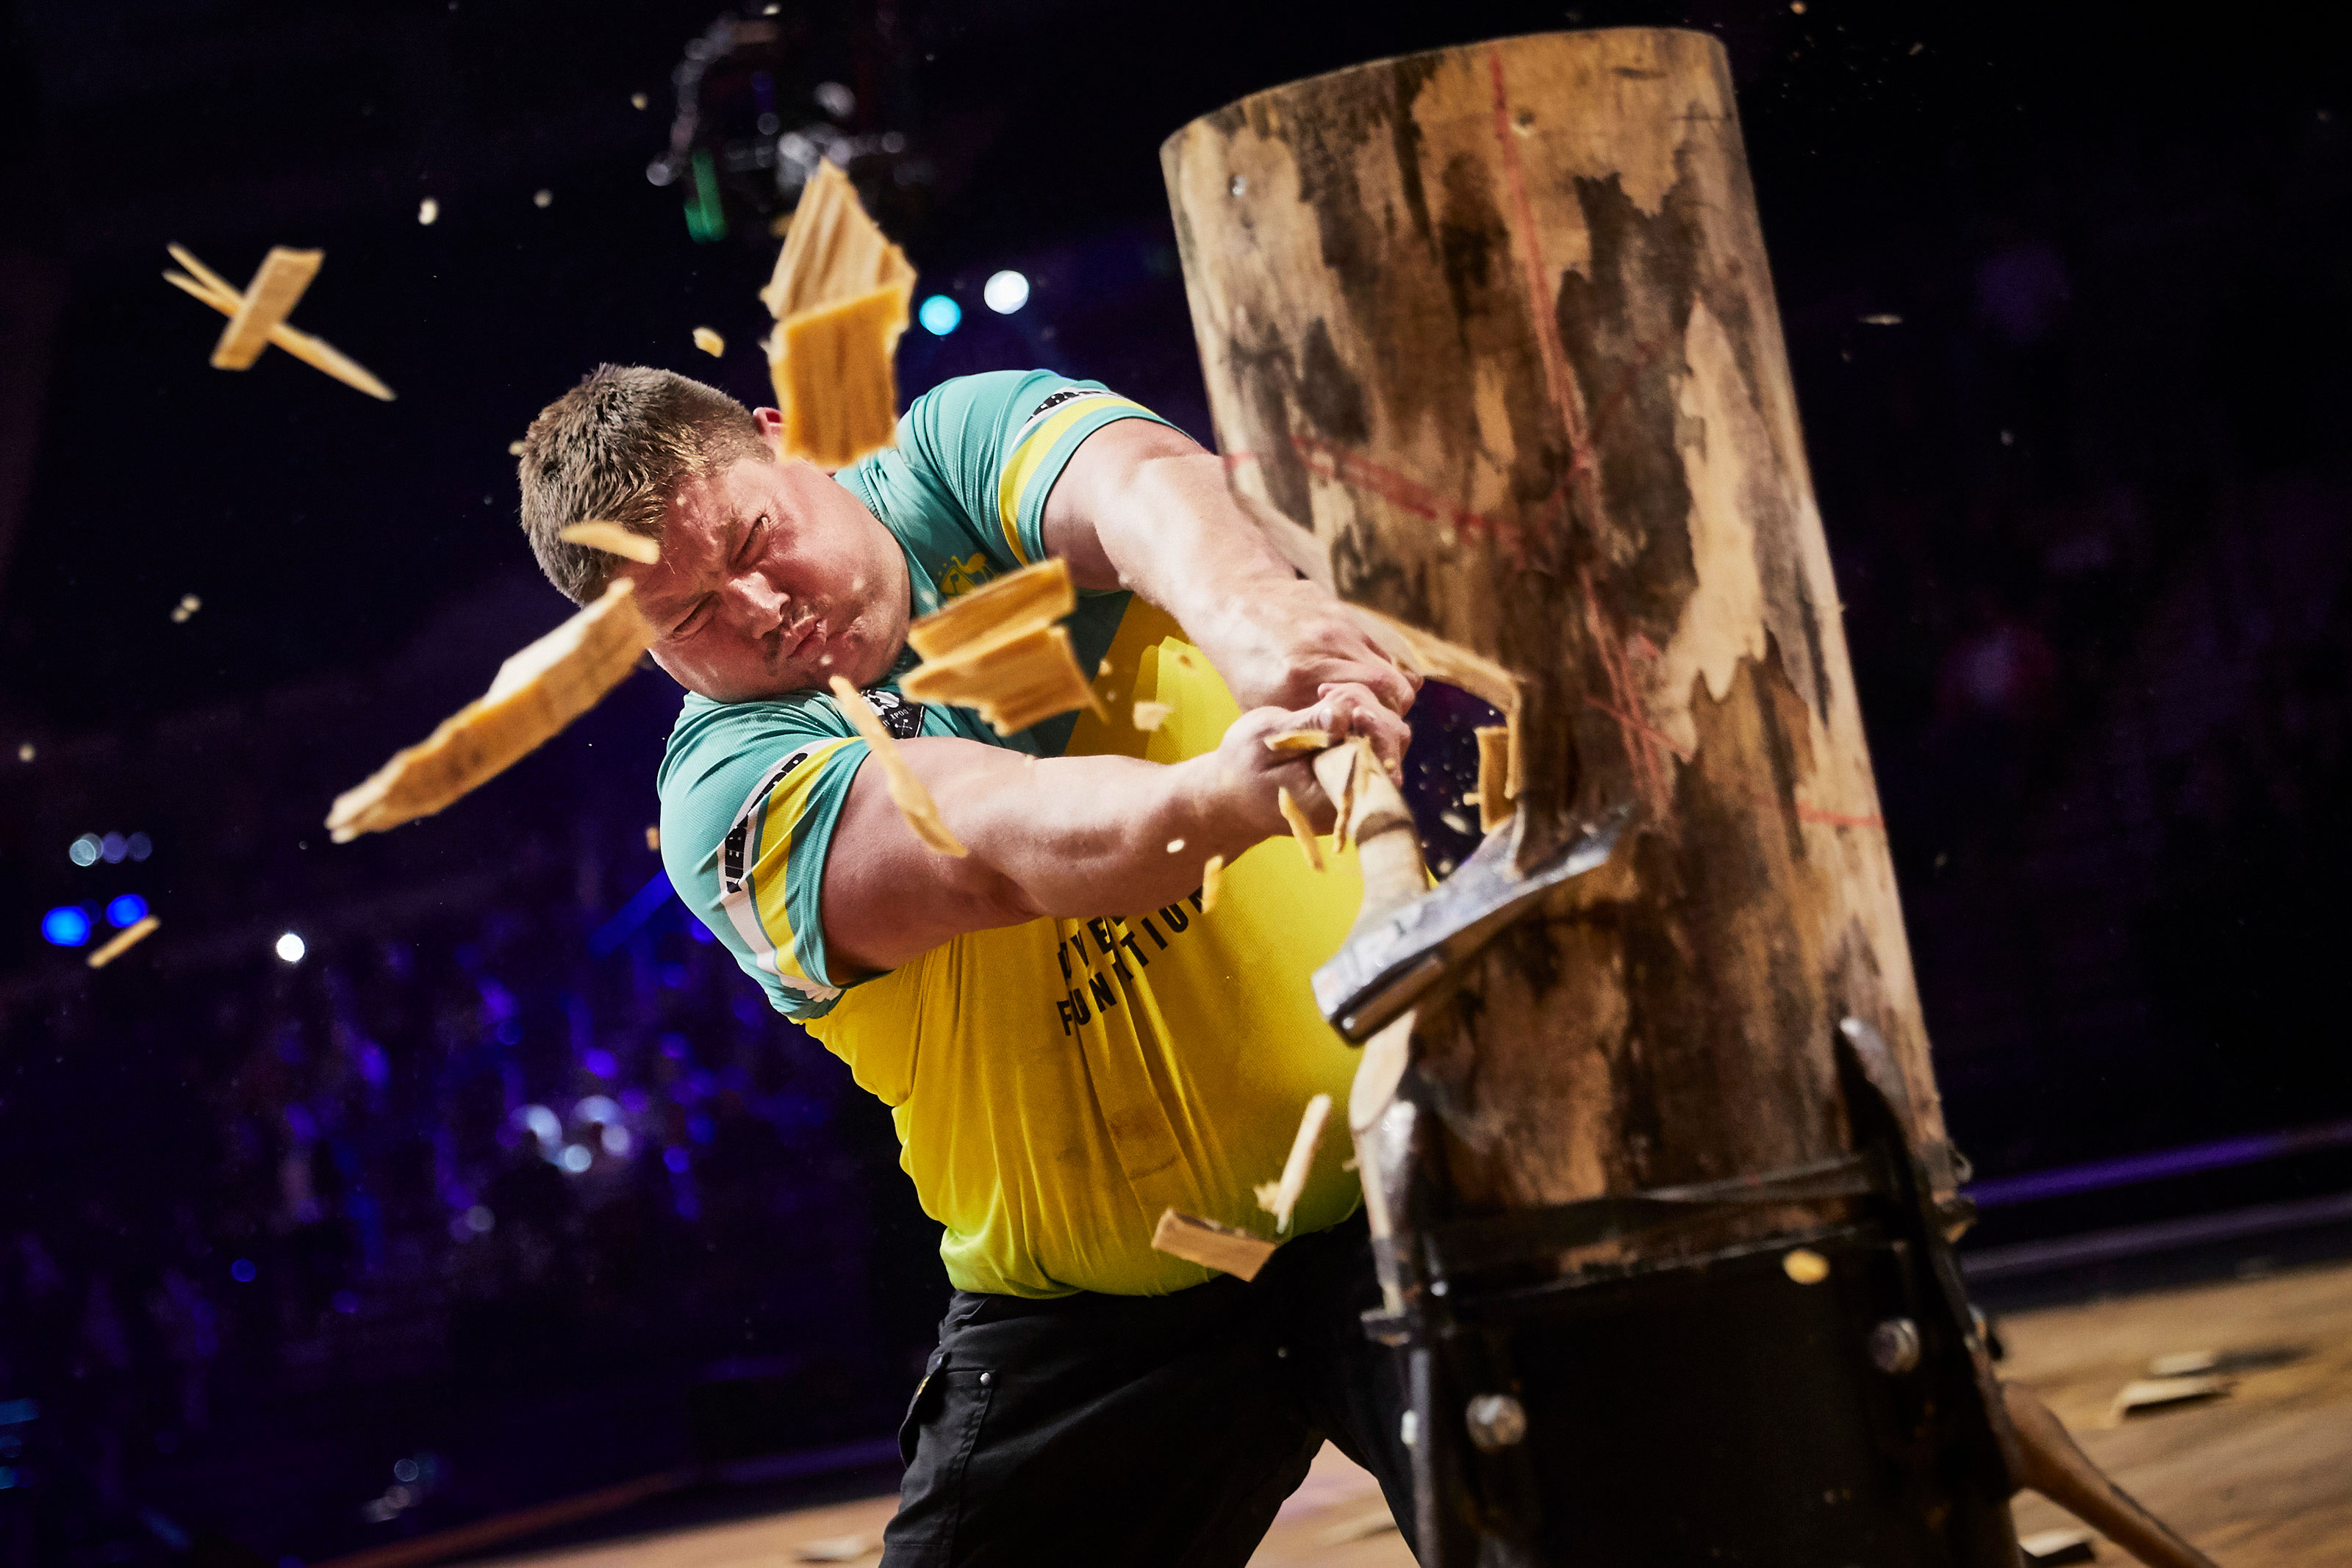 STIHL TIMBERSPORTS® athlete Glen Gillam at the 2018 Team World Championship in Liverpool during the Standing Block.